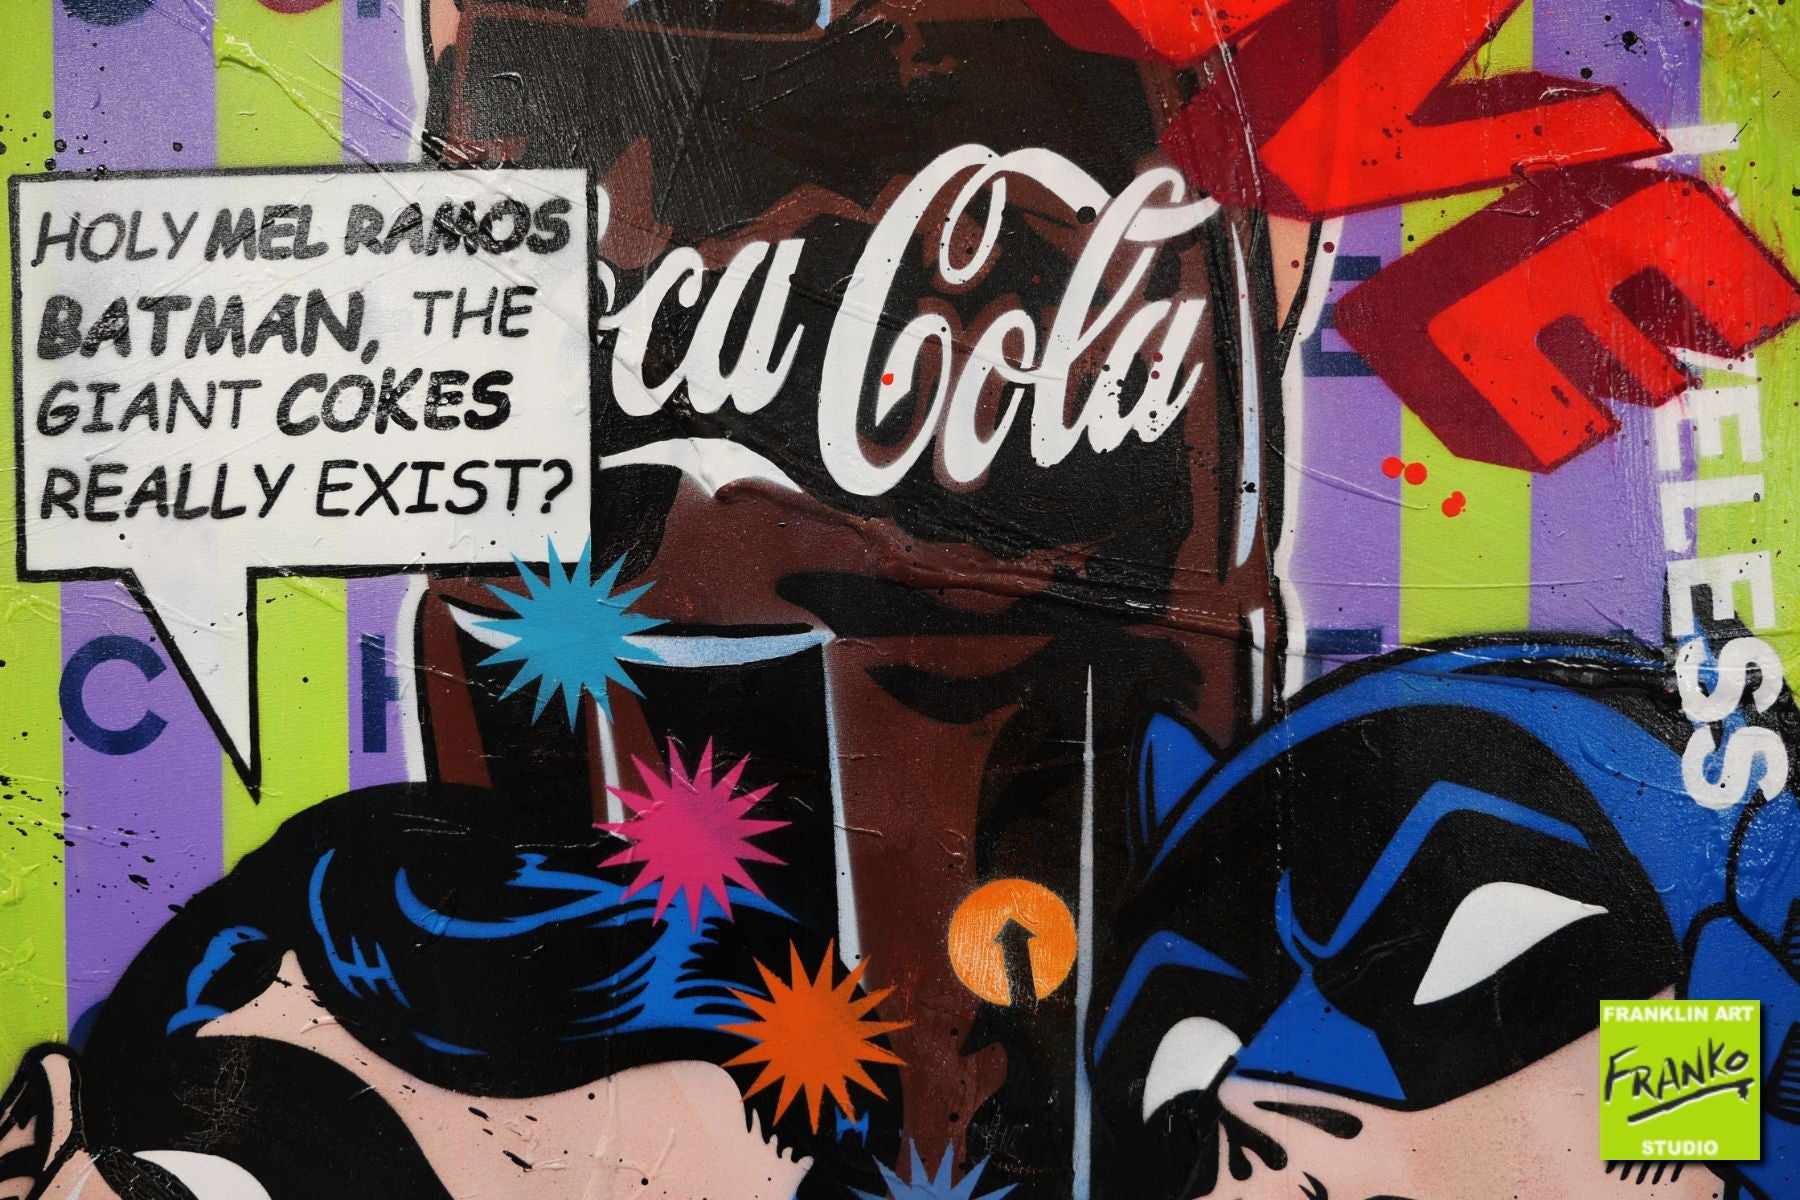 Simply Glamour 200cm x 80cm Batman Robin CocaCola Nude Textured Urban Pop Art Painting (SOLD)